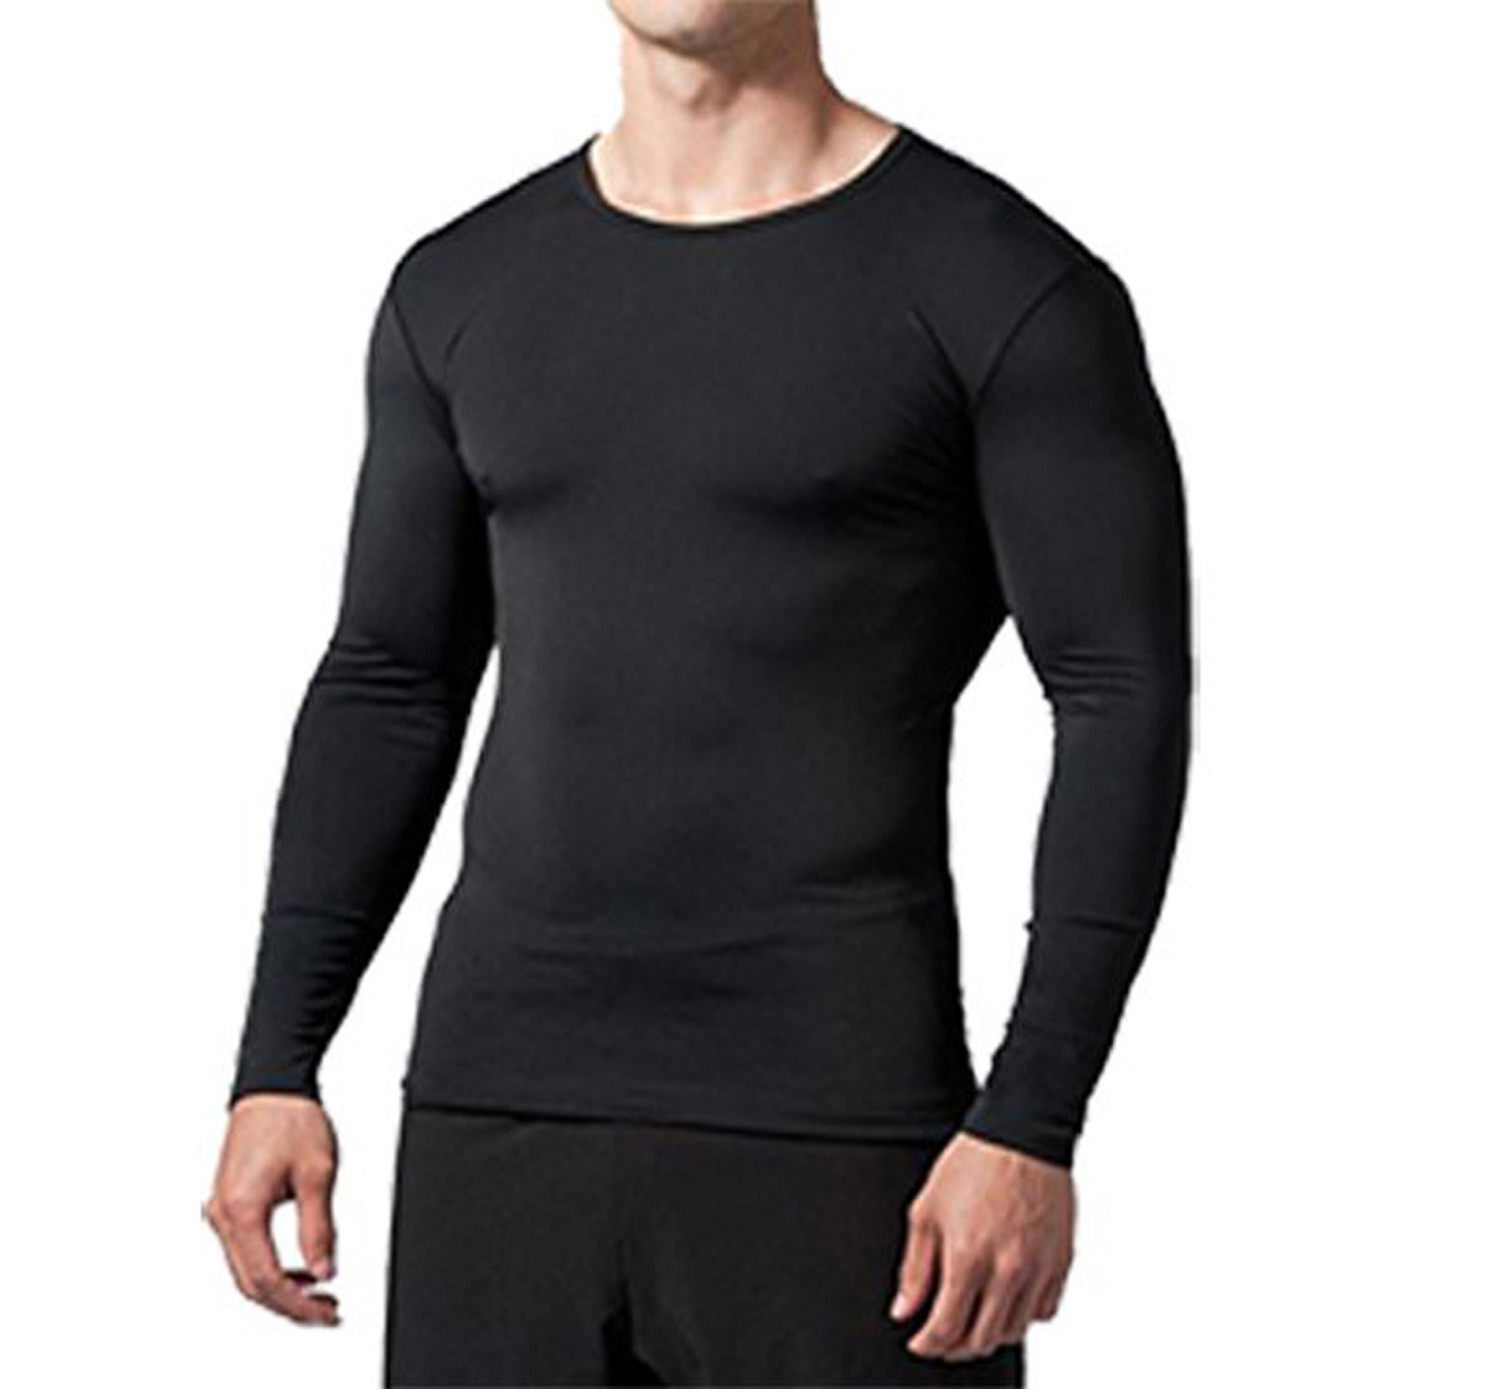 Buy Bloomun Full Sleeve Black Compression / Inner Tight Tops Online ...